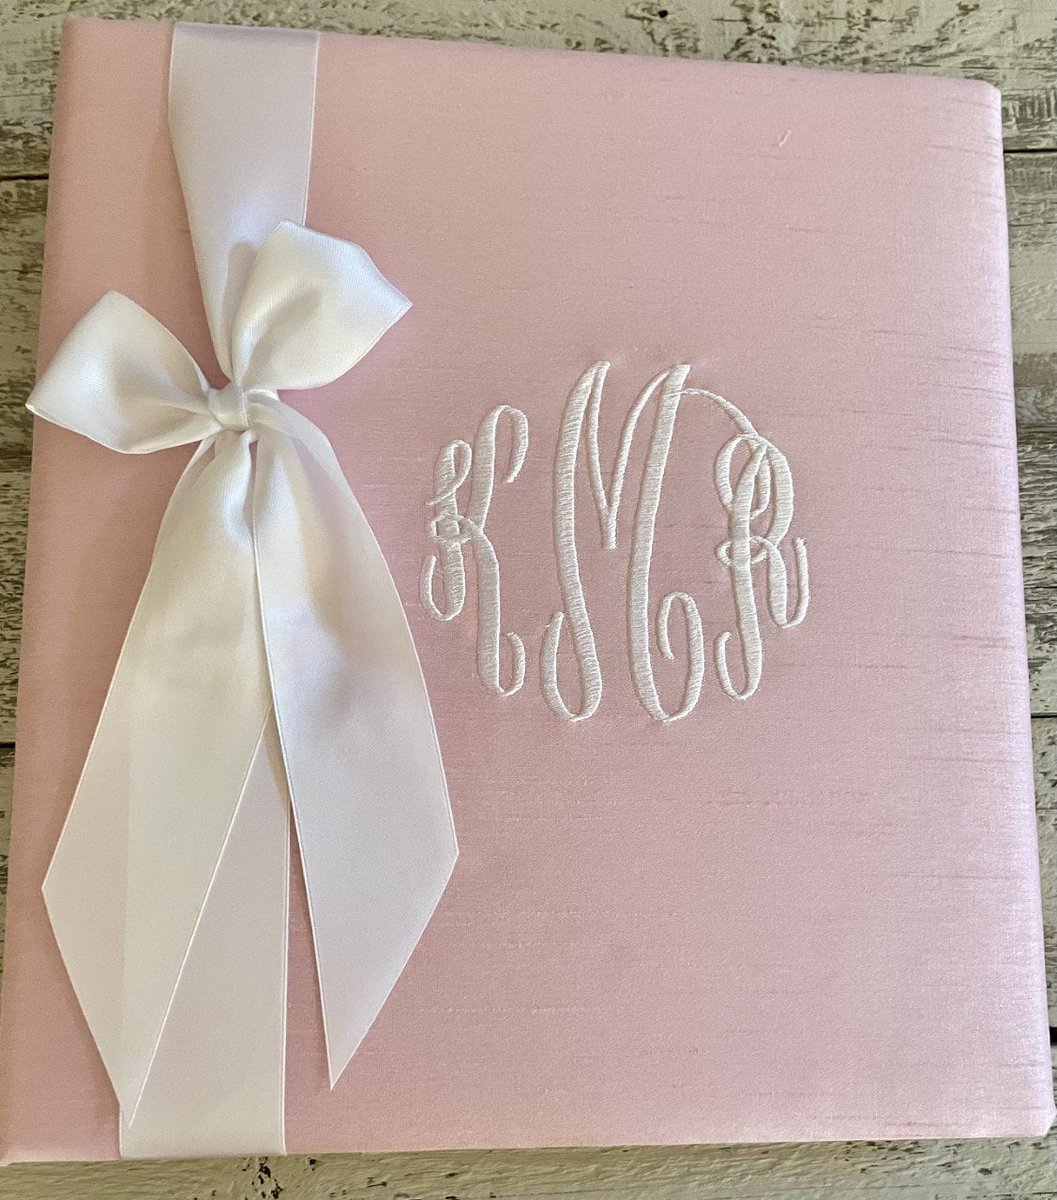 Thanks for the kind words! ★★★★★ 'Great quality, fast turnaround, thank you!' Kaitlin Bentley S. etsy.me/3MVAsCN #etsy #pink #blue #babymemorybook #keepsakebabybook #babybook #babymemories #babyjouraling #monogrammedbook #babys1stbook